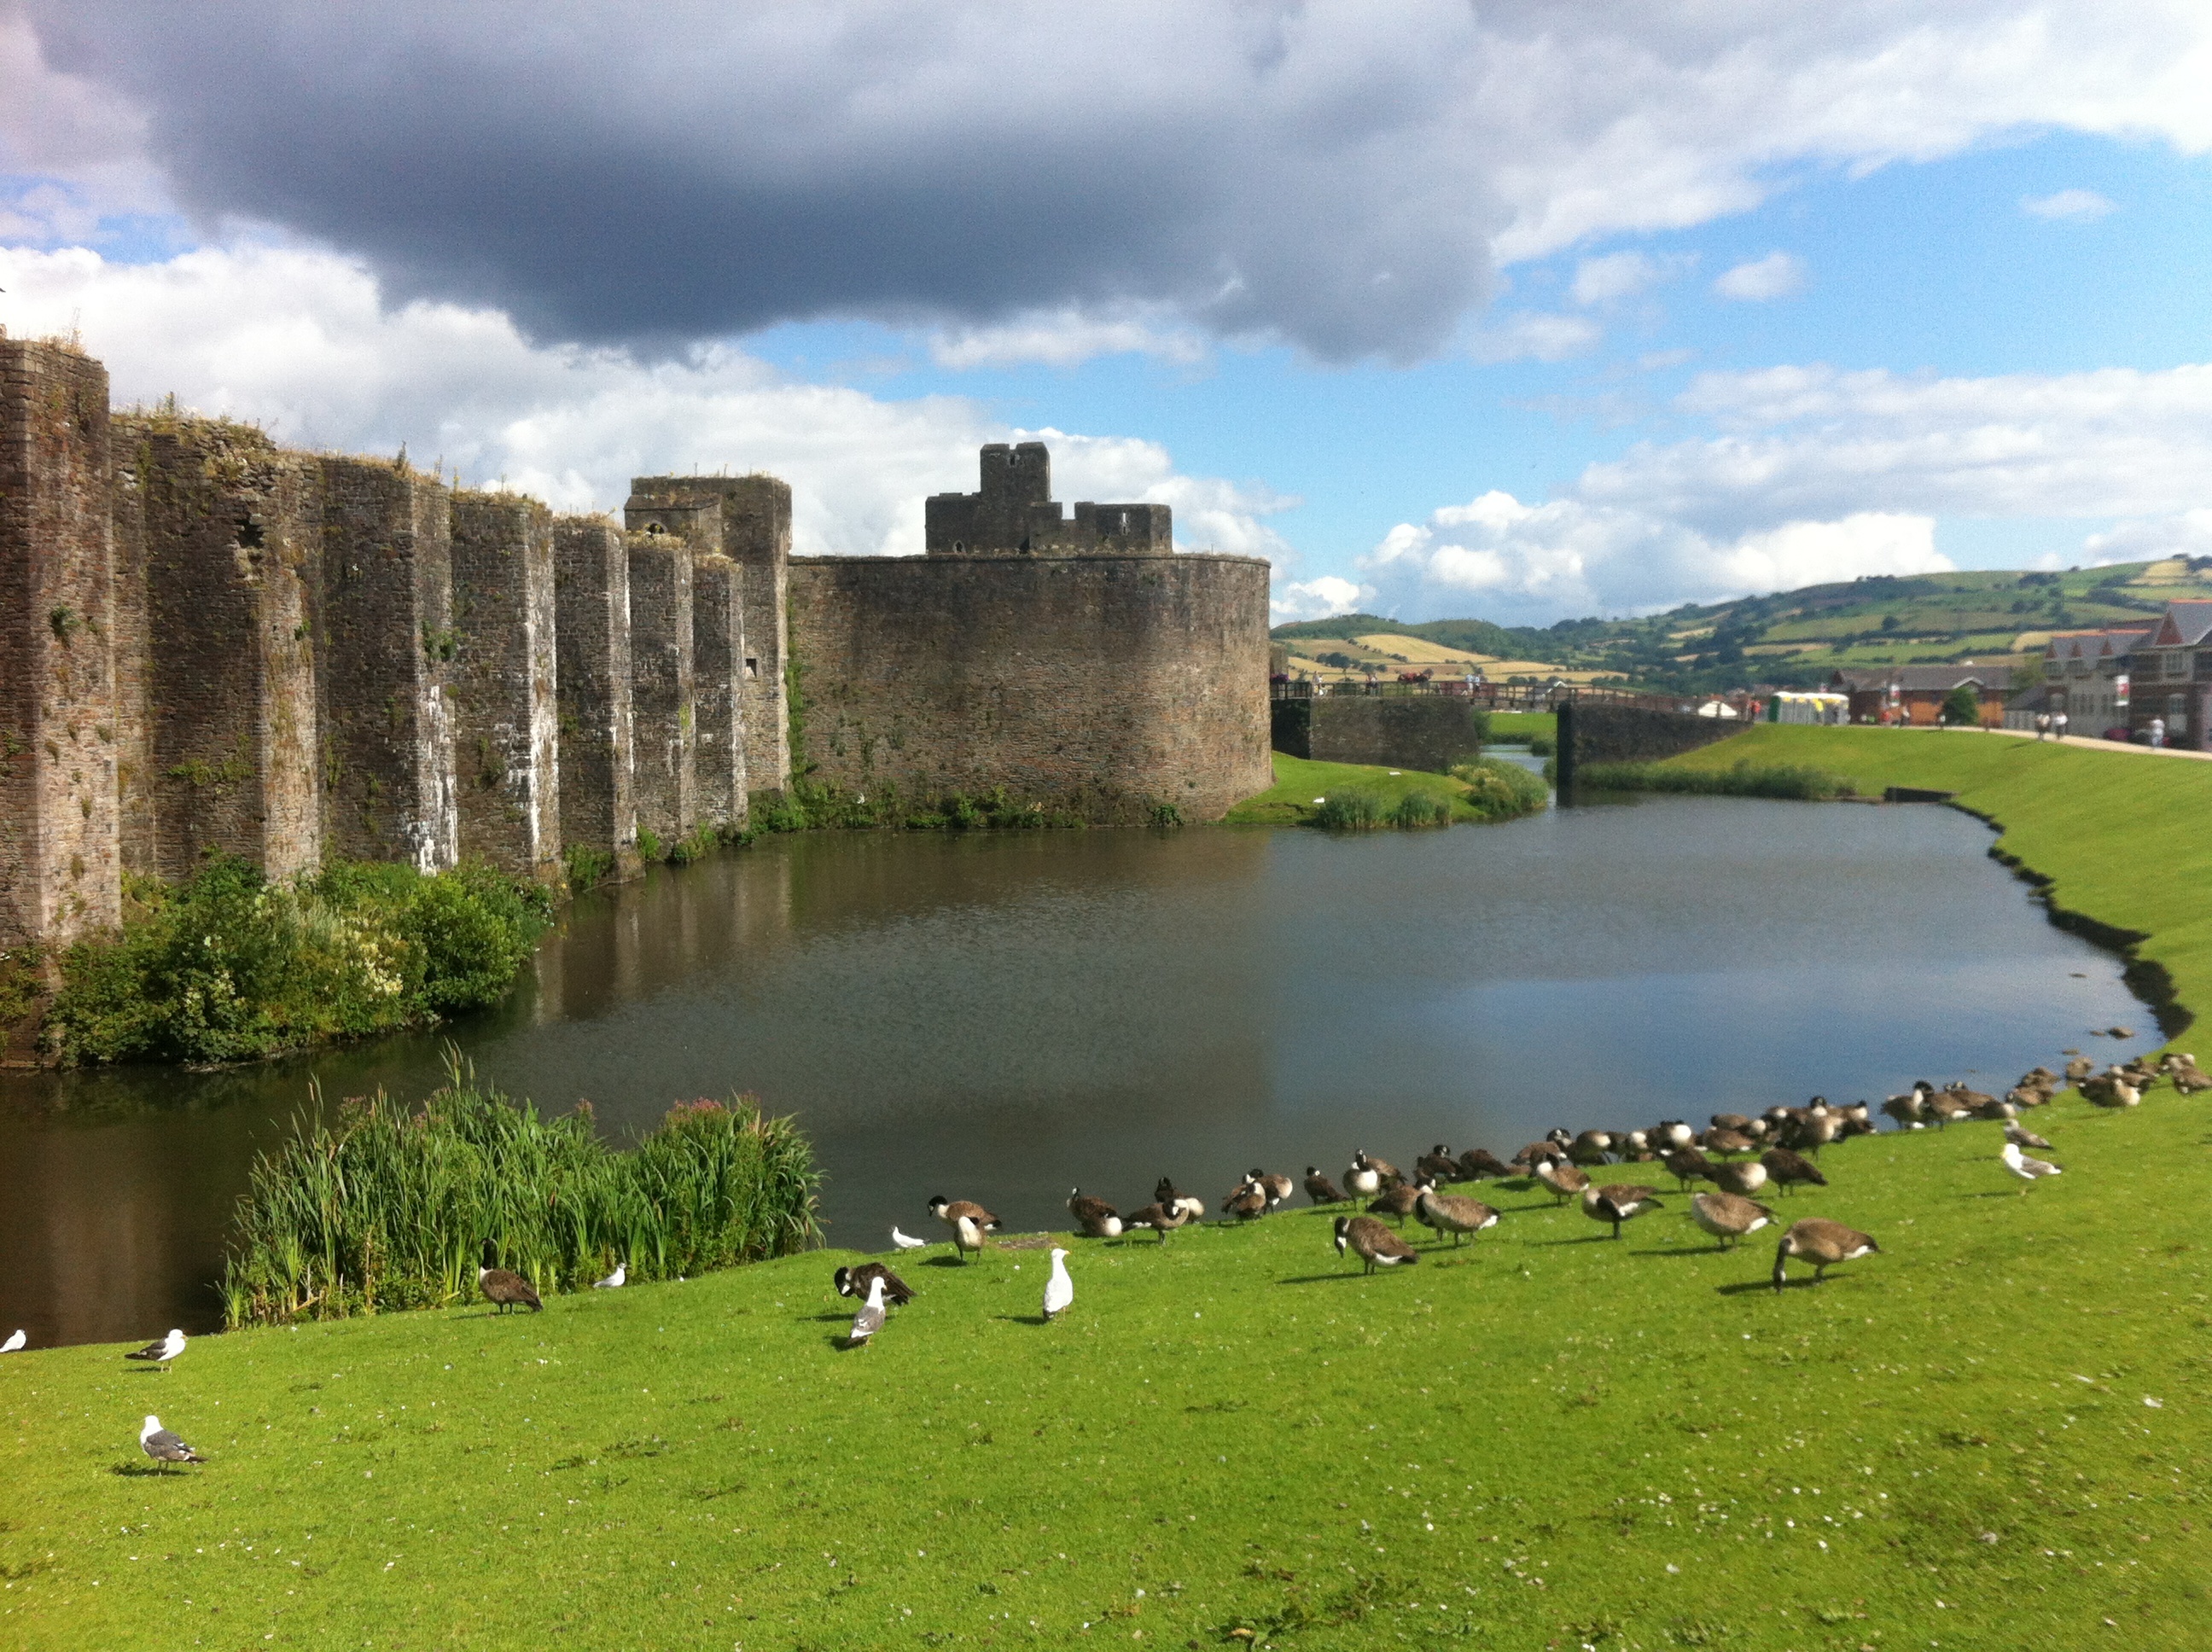 Caerphilly,Caerphilly,Wales,Local Casino Businesses Local Favorite Casino, Local Casinos Open, Local Online Casino, Local Gambling, Local Roulette, Blackjack Local, Baccarat Local, Poker Local, Local Slots, Local Slot Machines,UK, Casinos Near Me &#8211; Caerphilly &#8211; Caerphilly &#8211; Wales &#8211; UK &#8211; Top Slot Site In The UK